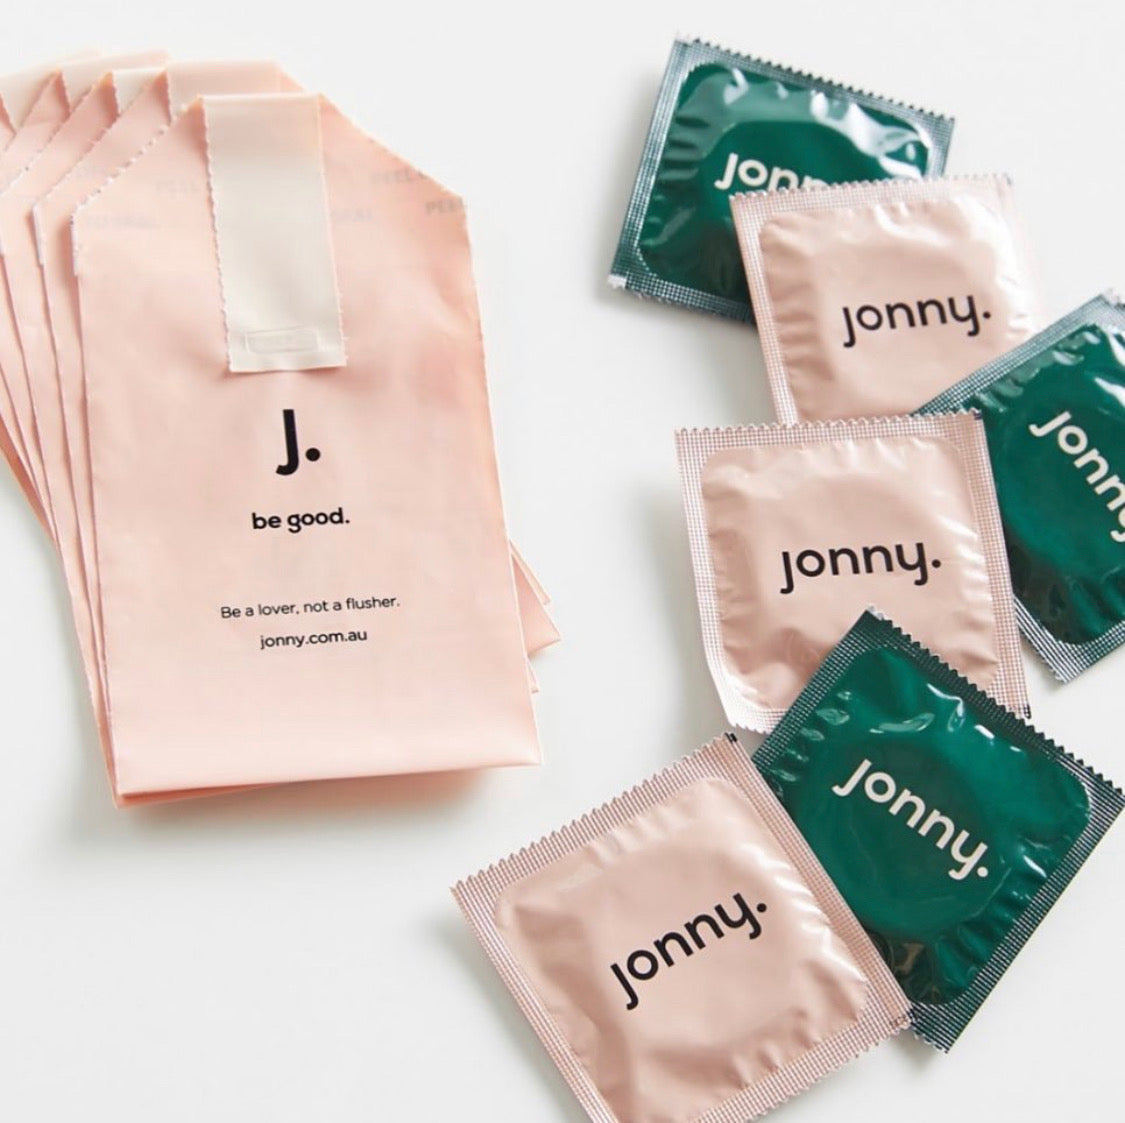 6 Green and Pink Jonny natural latex condoms and individual FabLittleBags for easy disposal